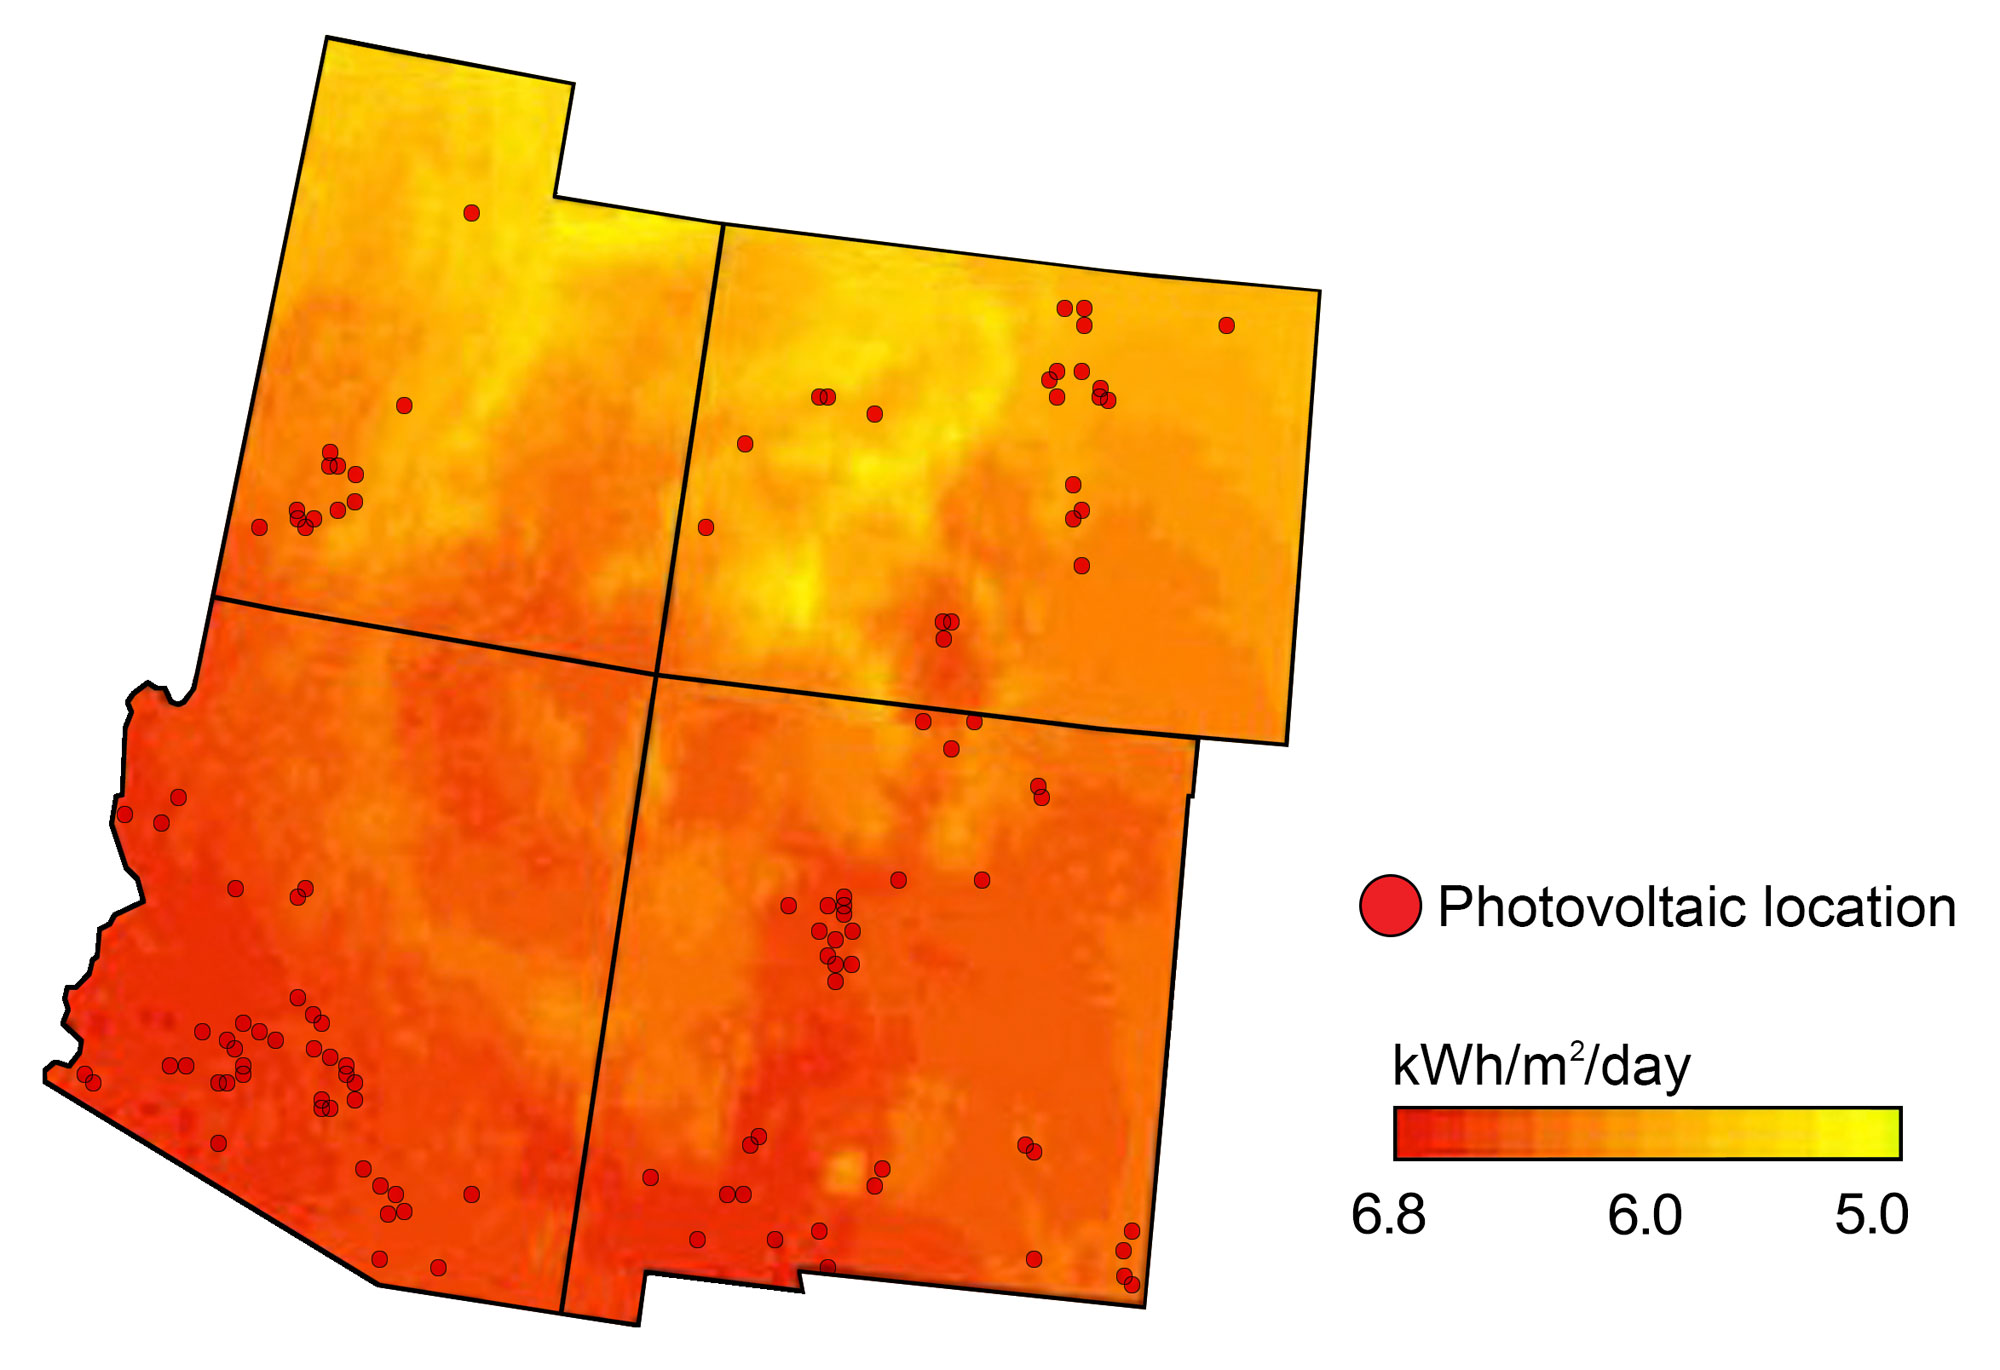 Map showing the southwestern states (Arizona, Colorado, New Mexico, and Utah) shaded from yellow to red to show available solar for power generation. Arizona and New Mexico are mostly red (high), whereas parts of Utah and Colorado are yellow (lower). Red dots mark the localtions of photovoltaic (solar) plants, which are found in all four states. 